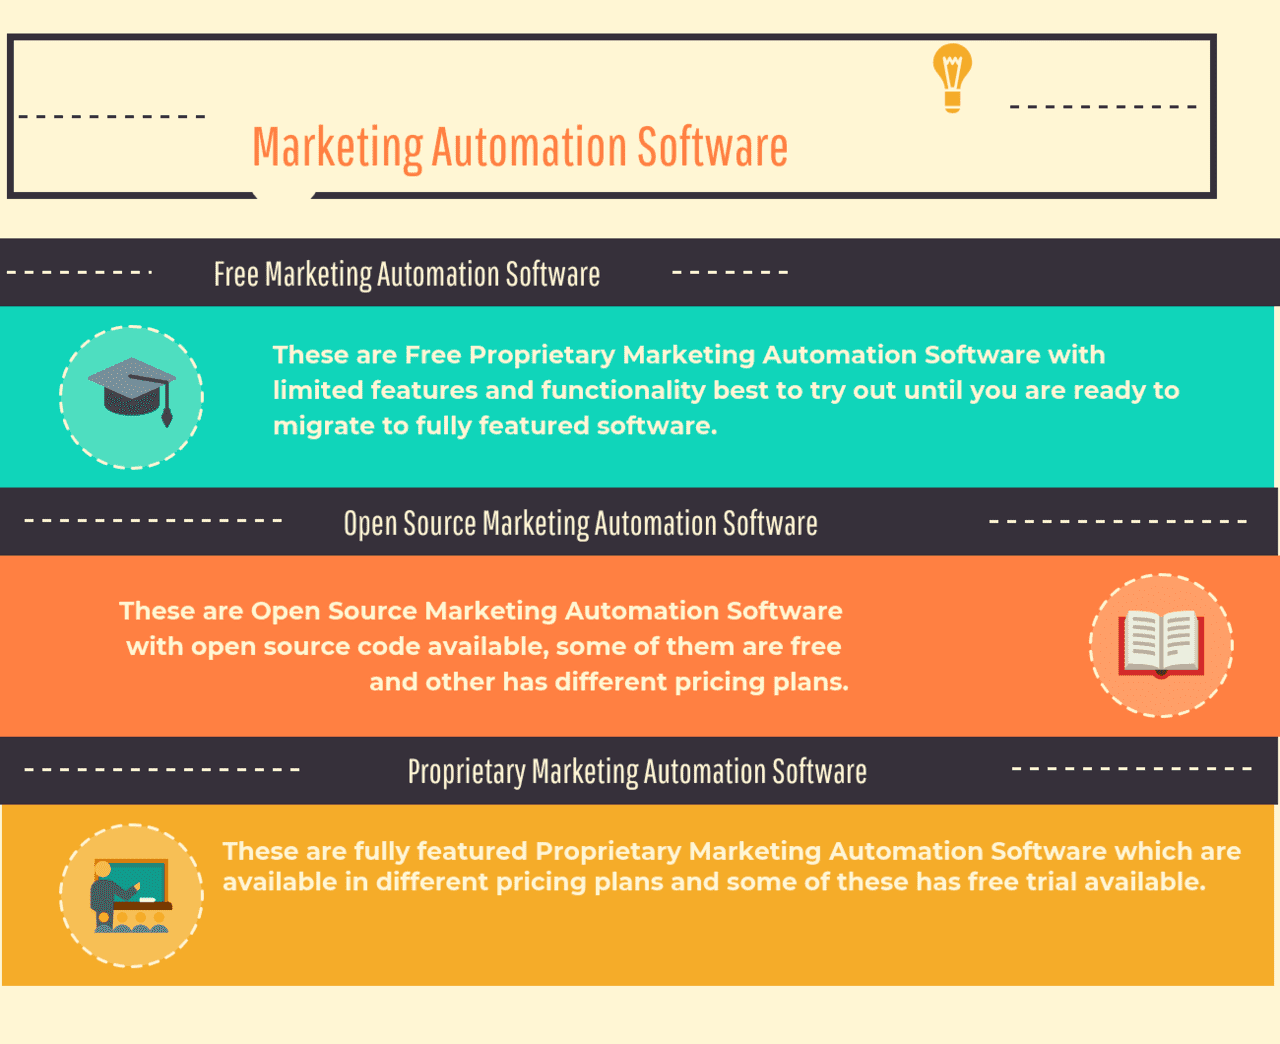 Marketing Automation Software Types